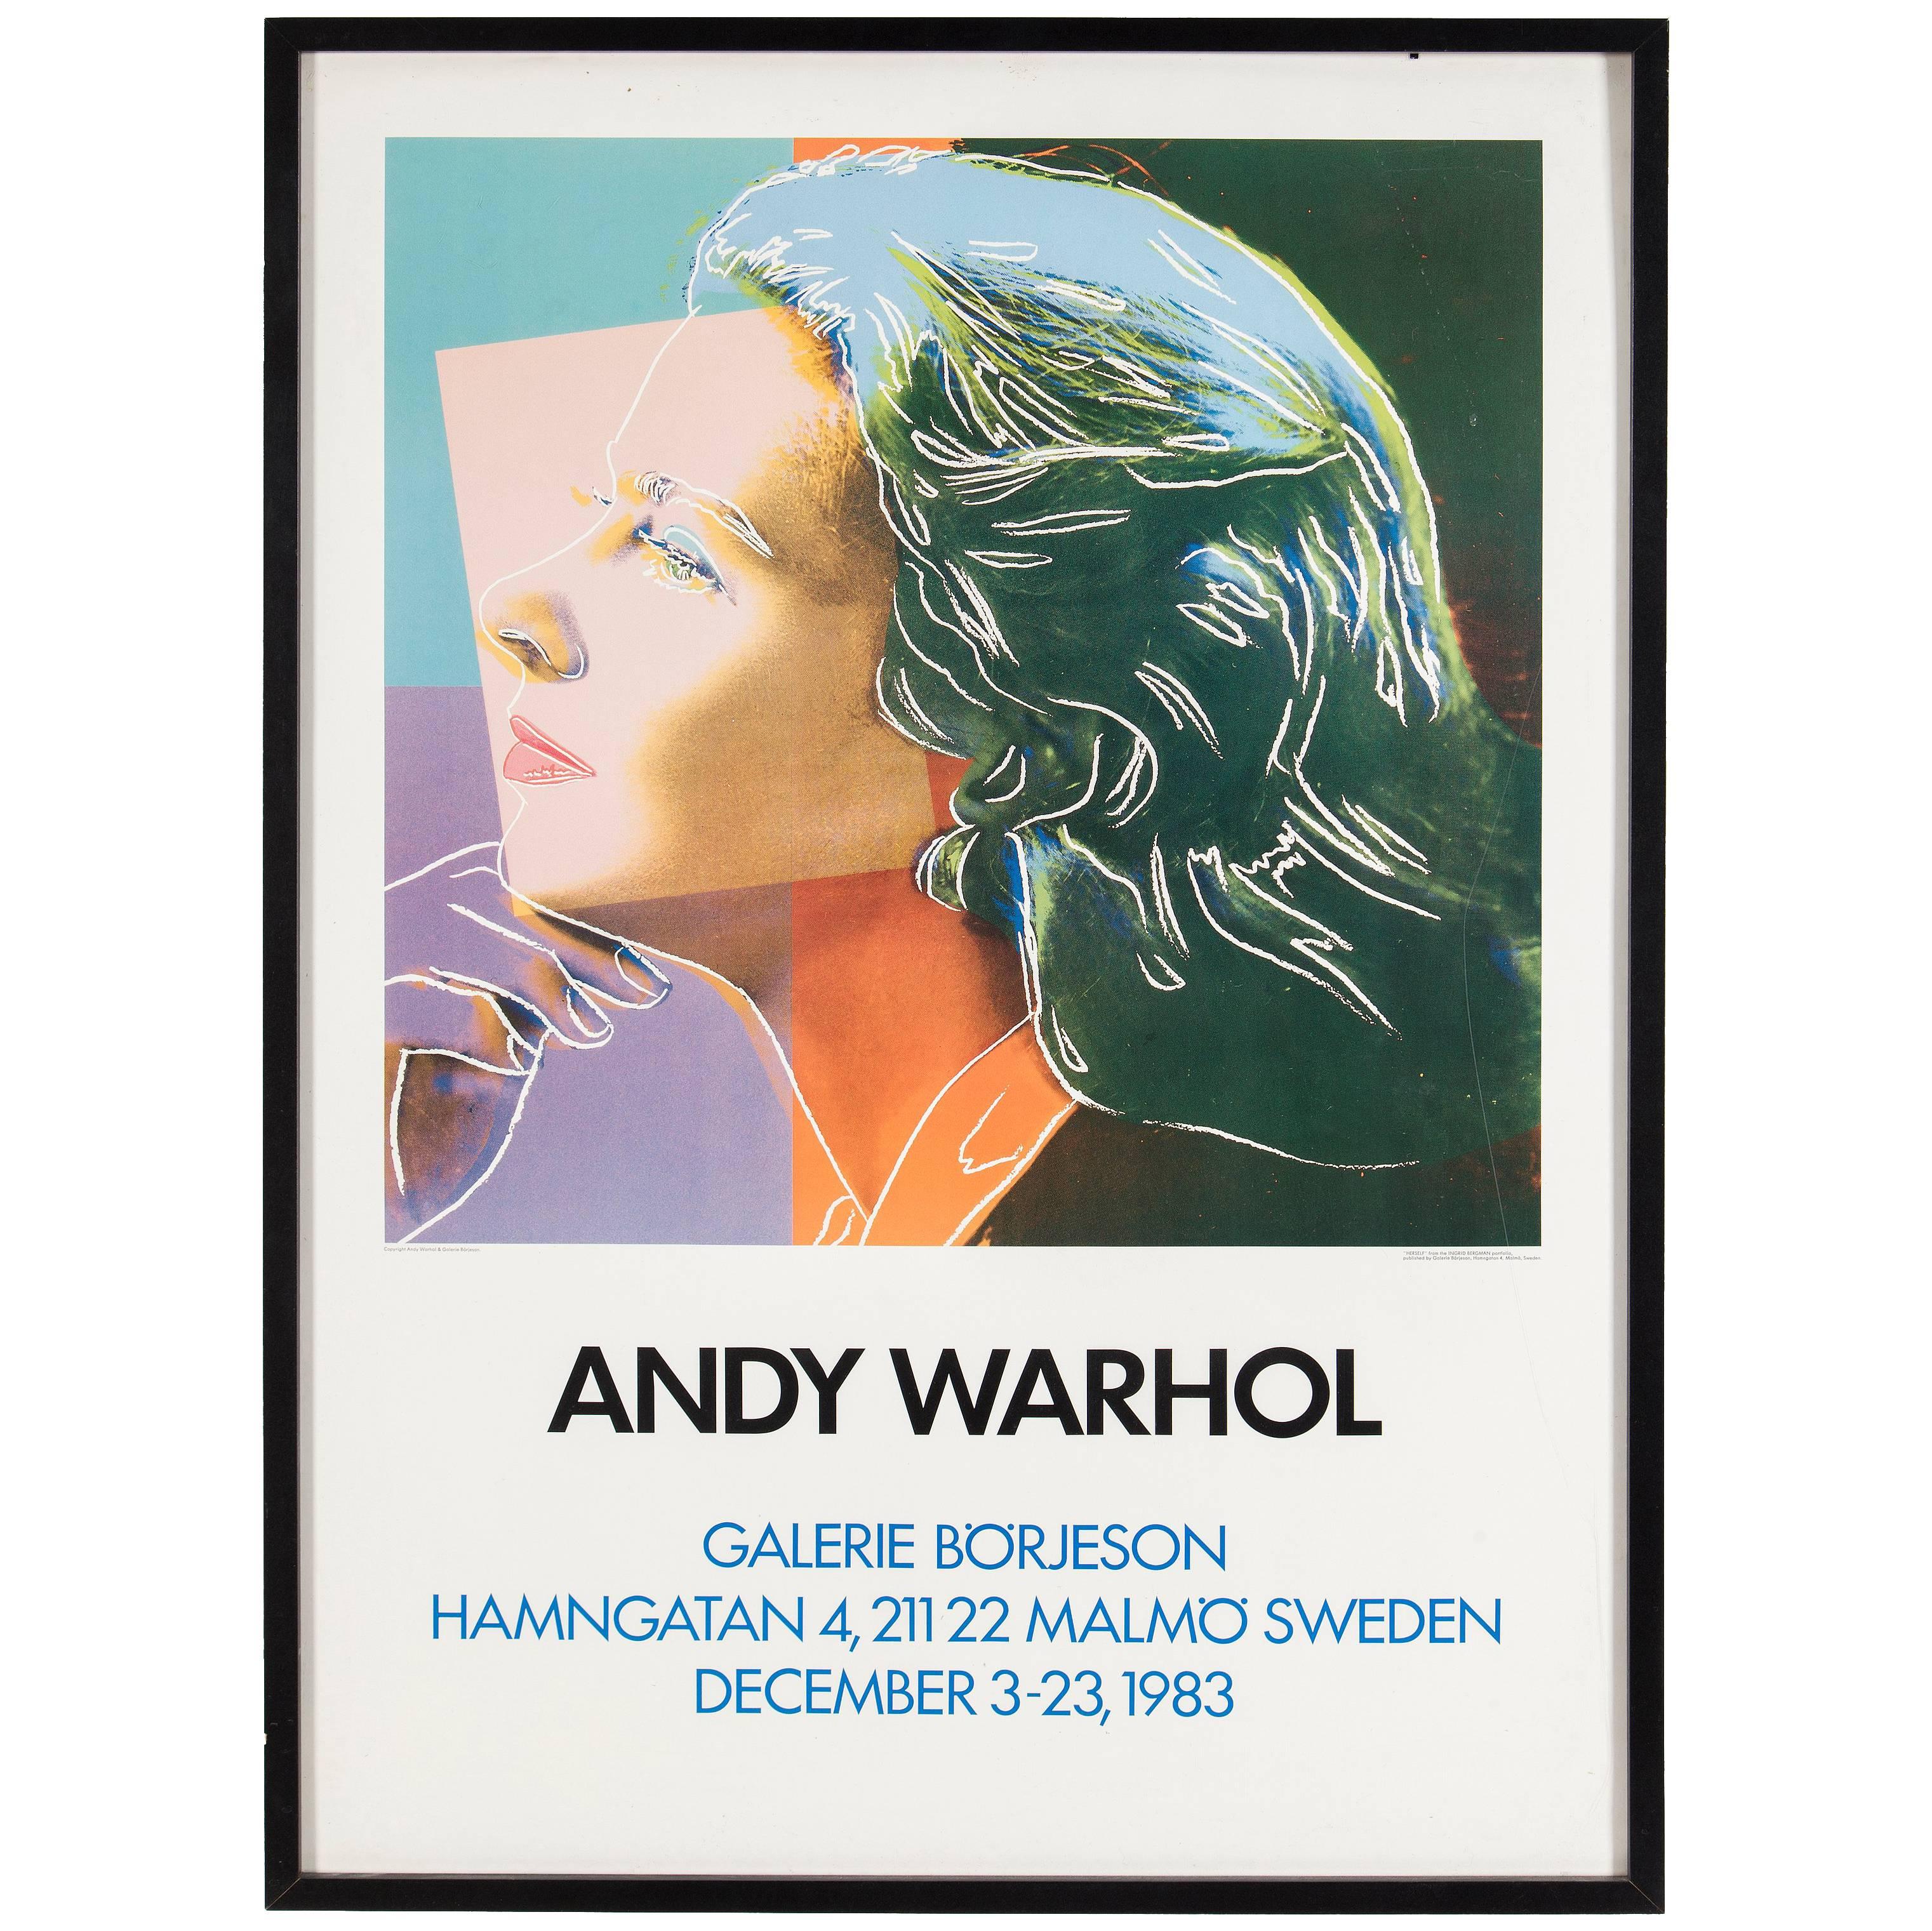 Vintage exhibition poster featuring Ingrid Bergman, after Andy Warhol